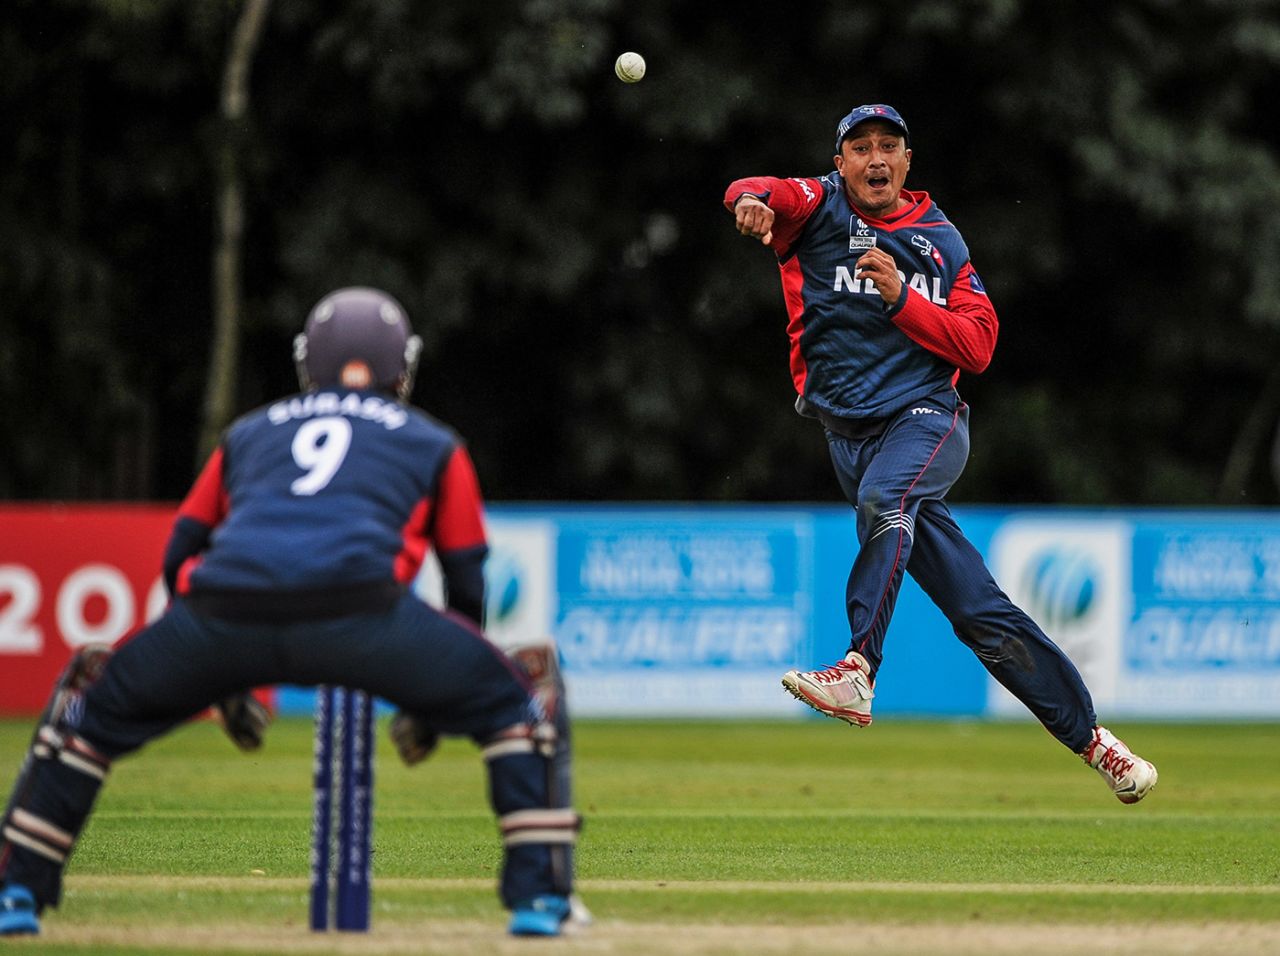 Paras Khadka throws the ball to the keeper, Hong Kong v Nepal, ICC World T20 Qualifier, Belfast, July 15, 2015